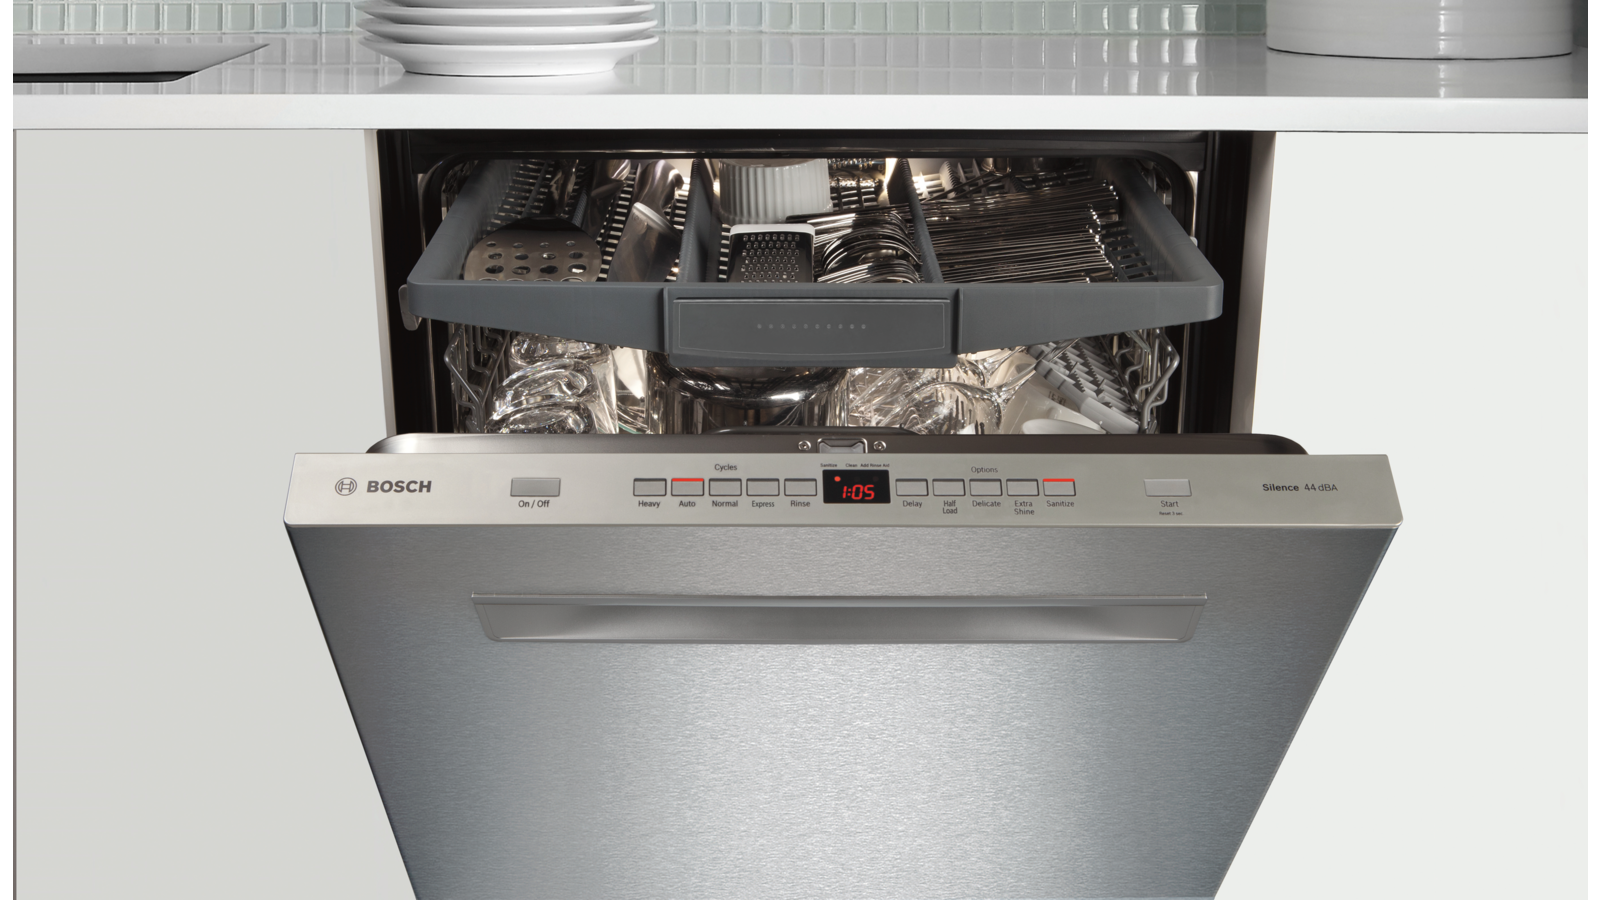 - SHP65T55UC - 500 Stainless steel